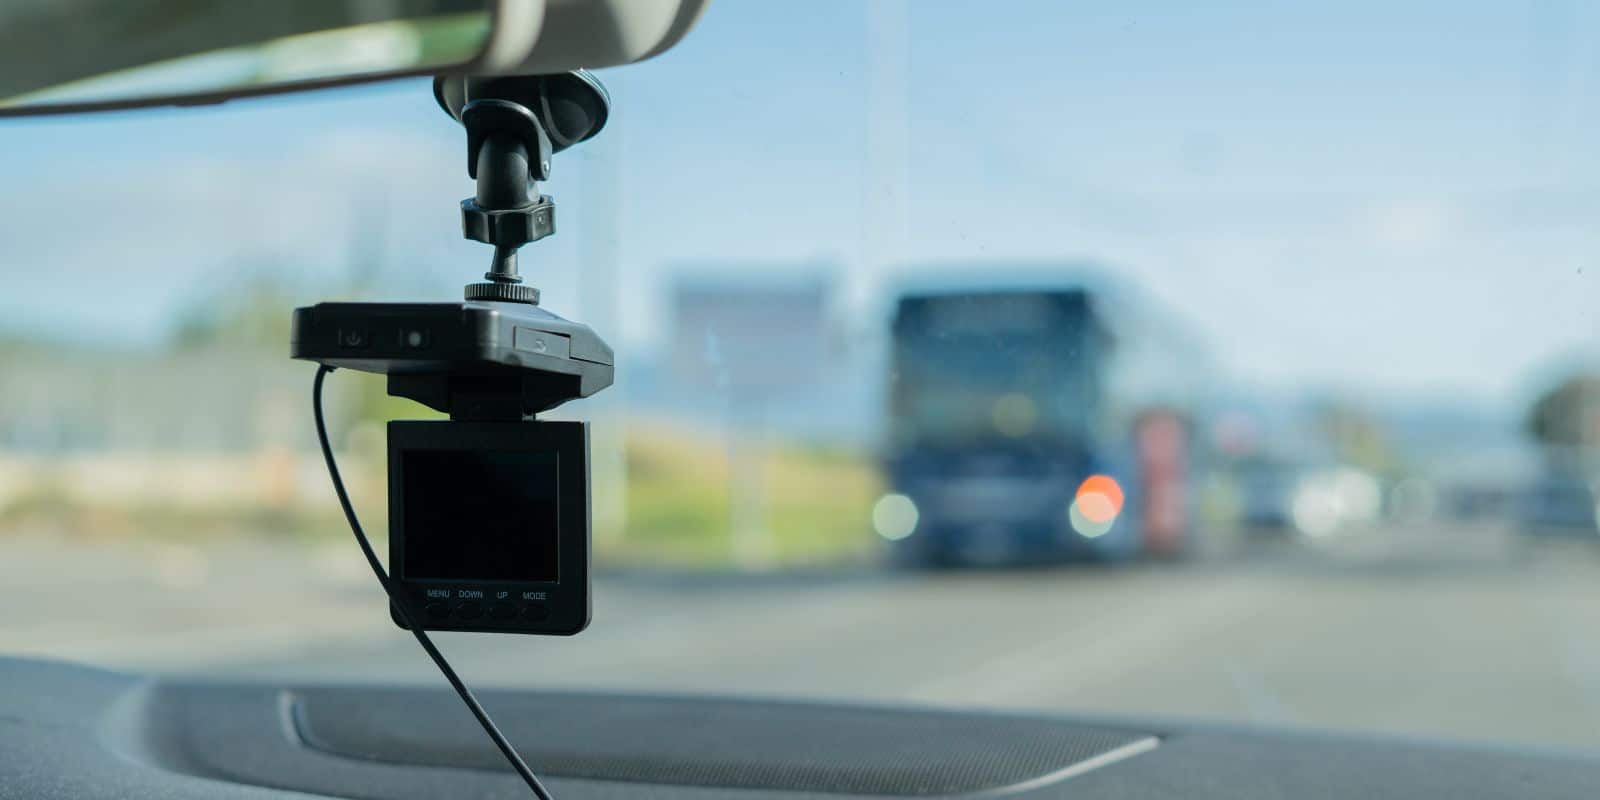 A car camera is mounted on the dashboard of a vehicle.